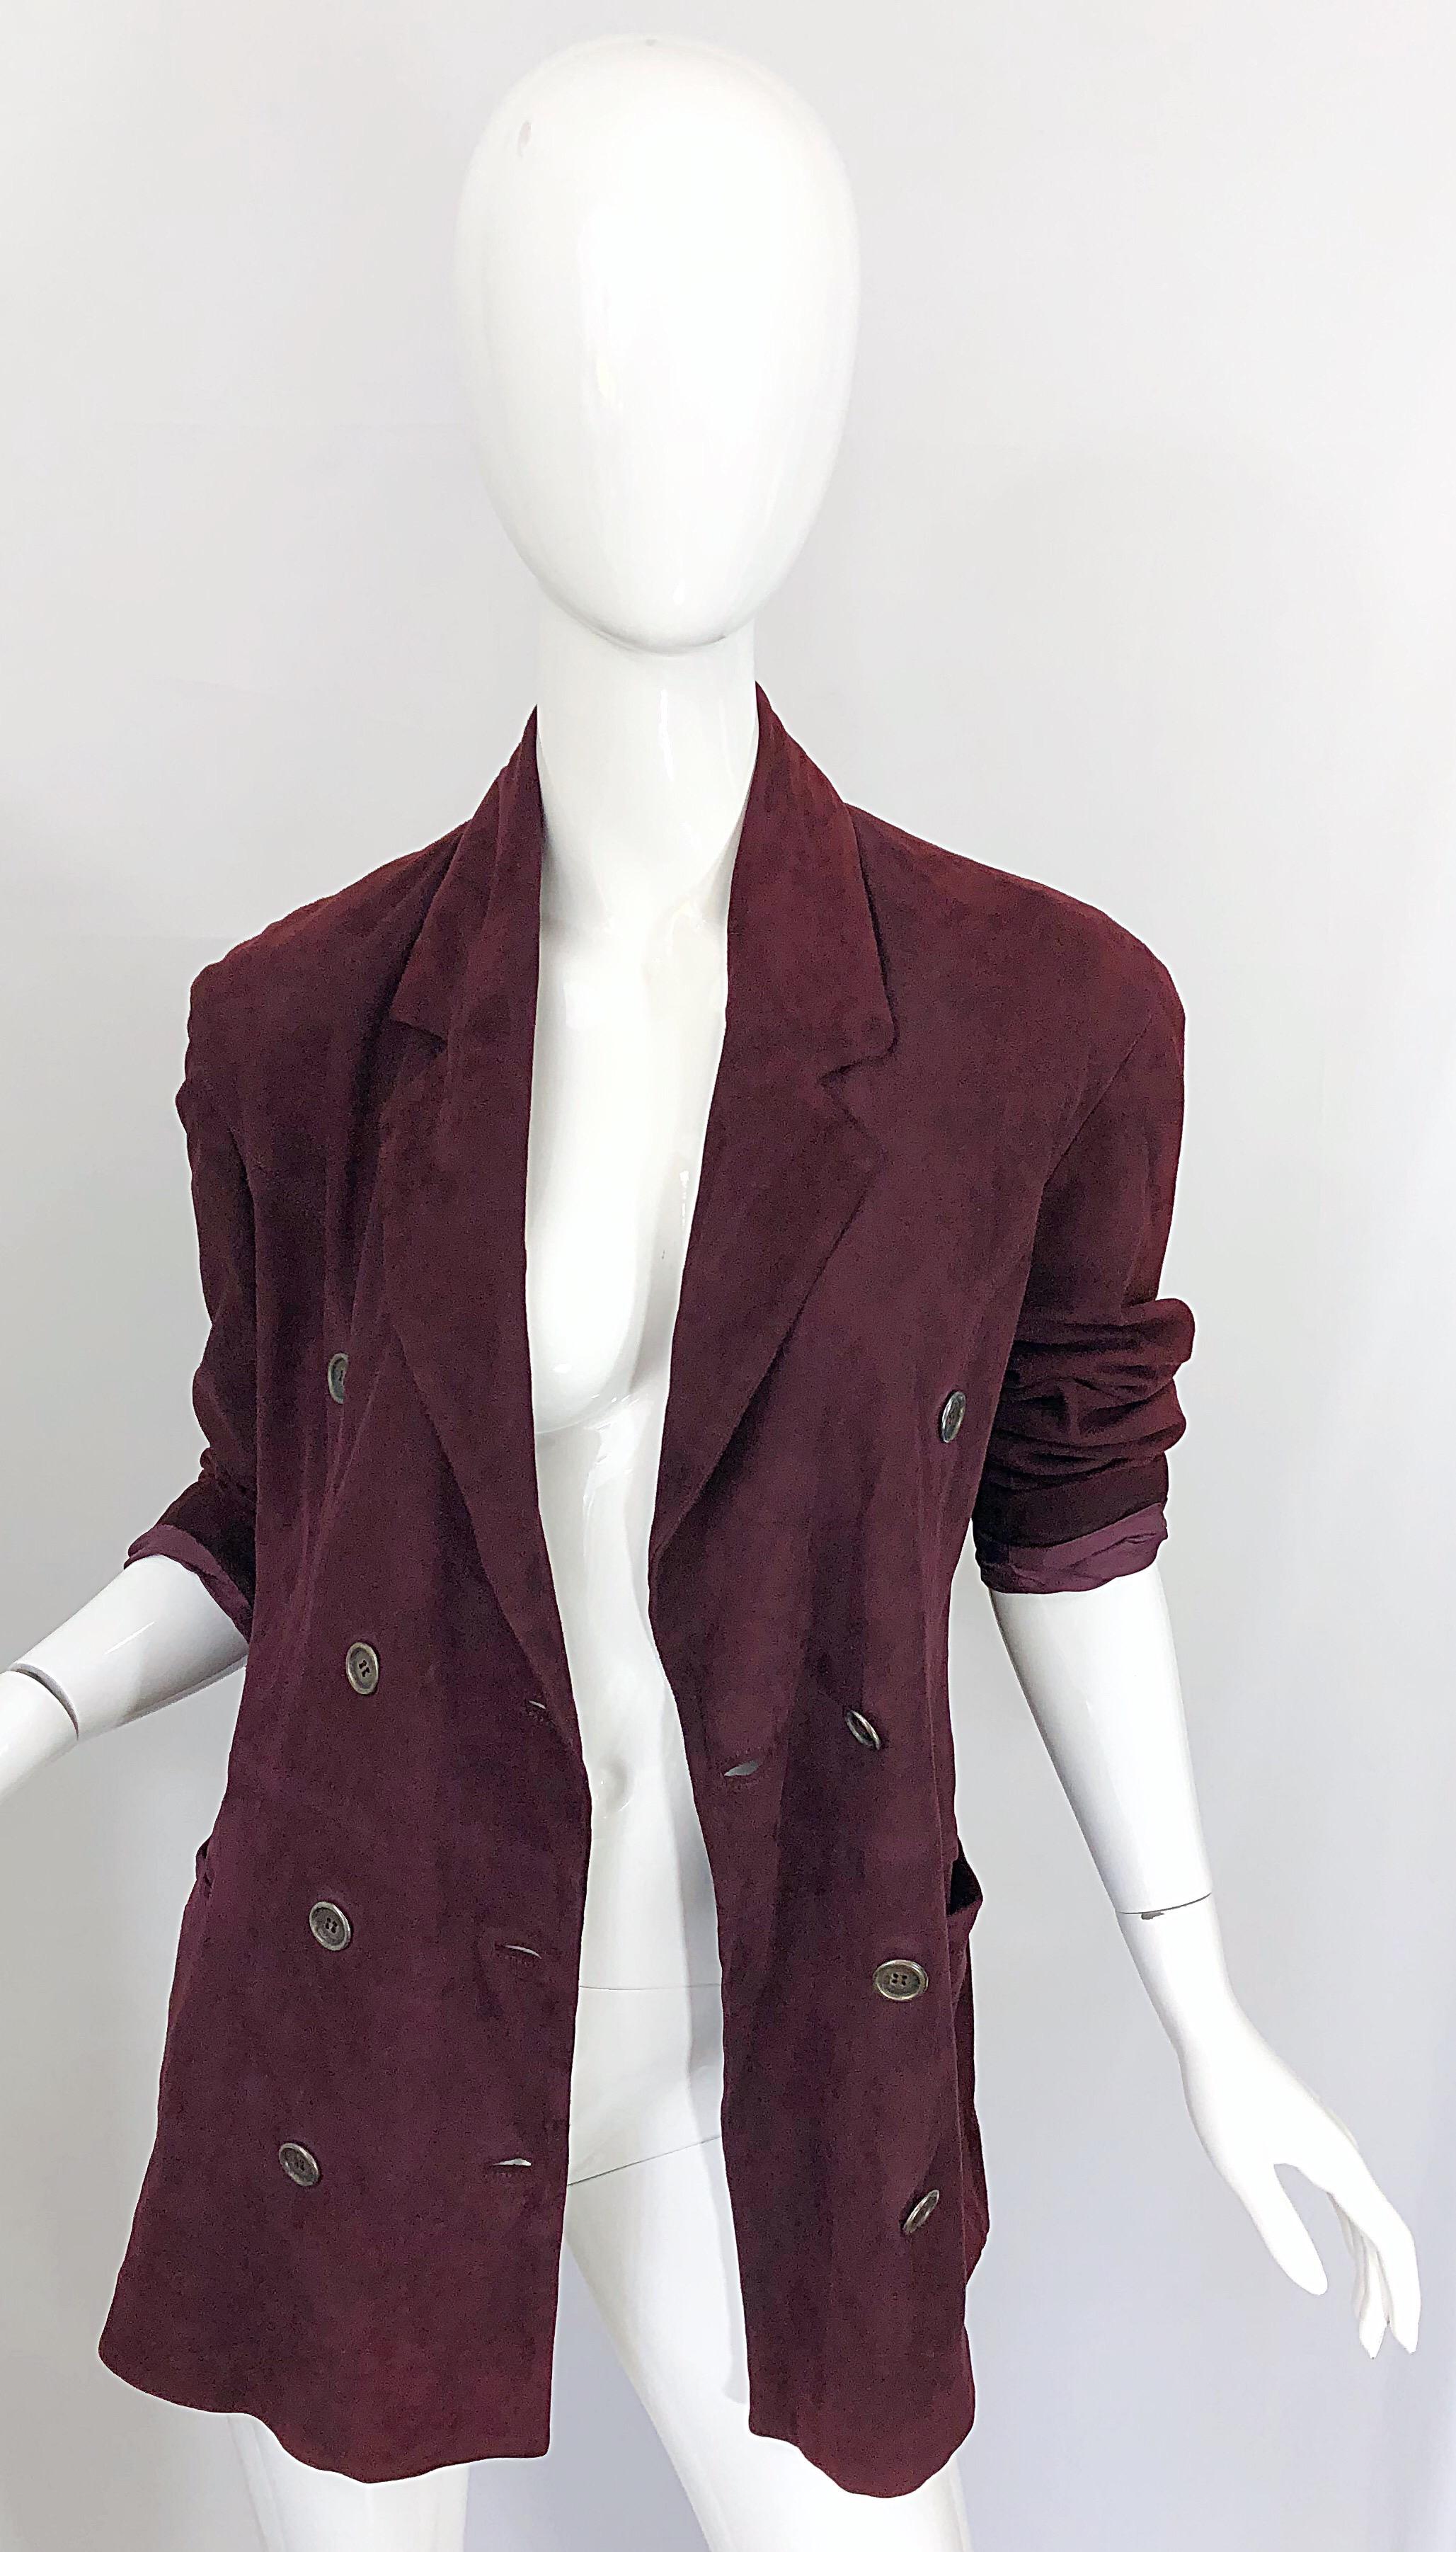 Ozbek 1990s Suede Leather Size 8 Burgundy Maroon Double Breasted Blazer Jacket For Sale 5